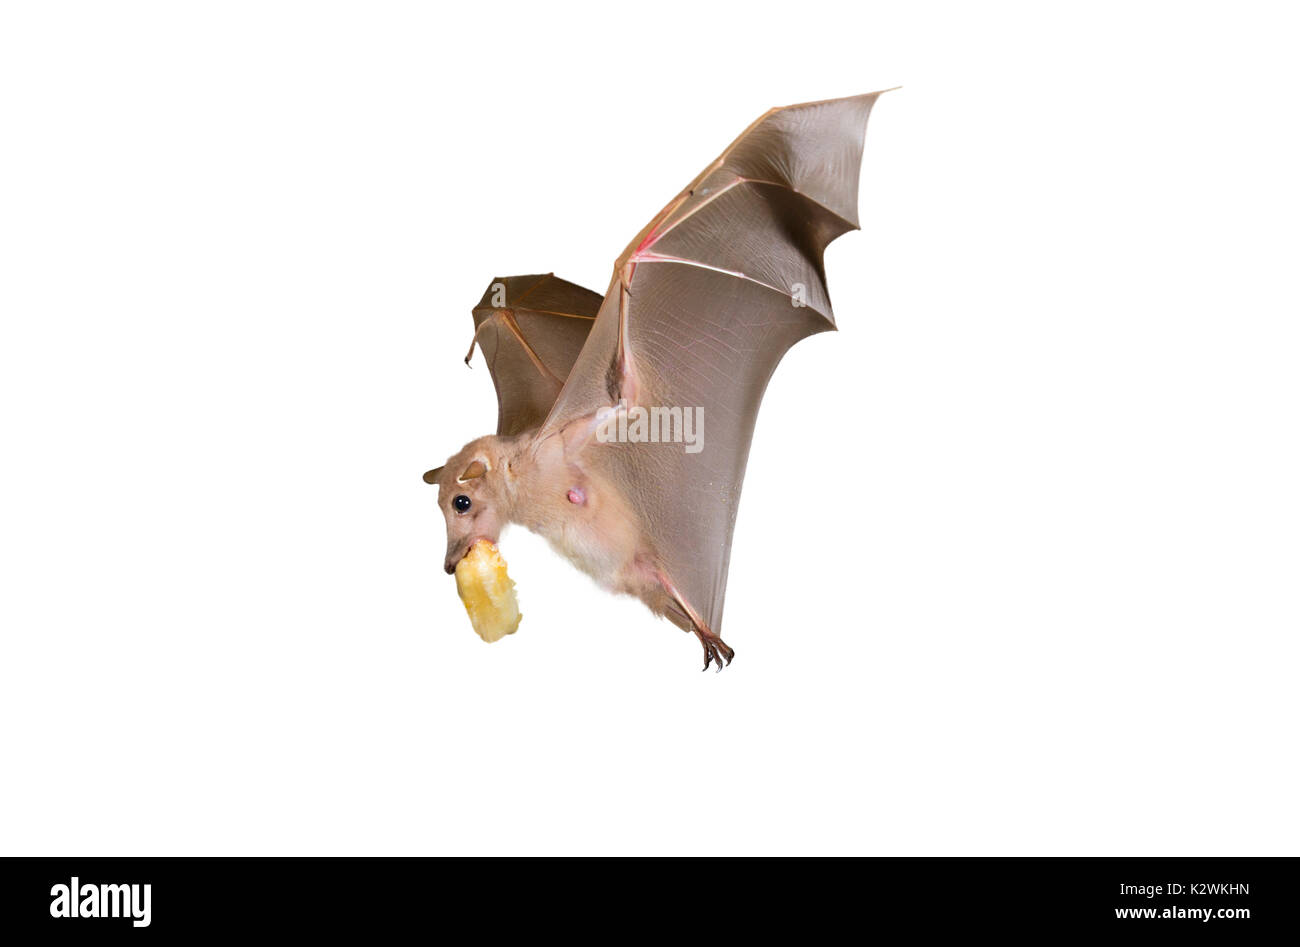 Gambian epauletted fruit bat (Epomophorus gambianus) flying with a fruit in the mouth, isolated on white background. Stock Photo